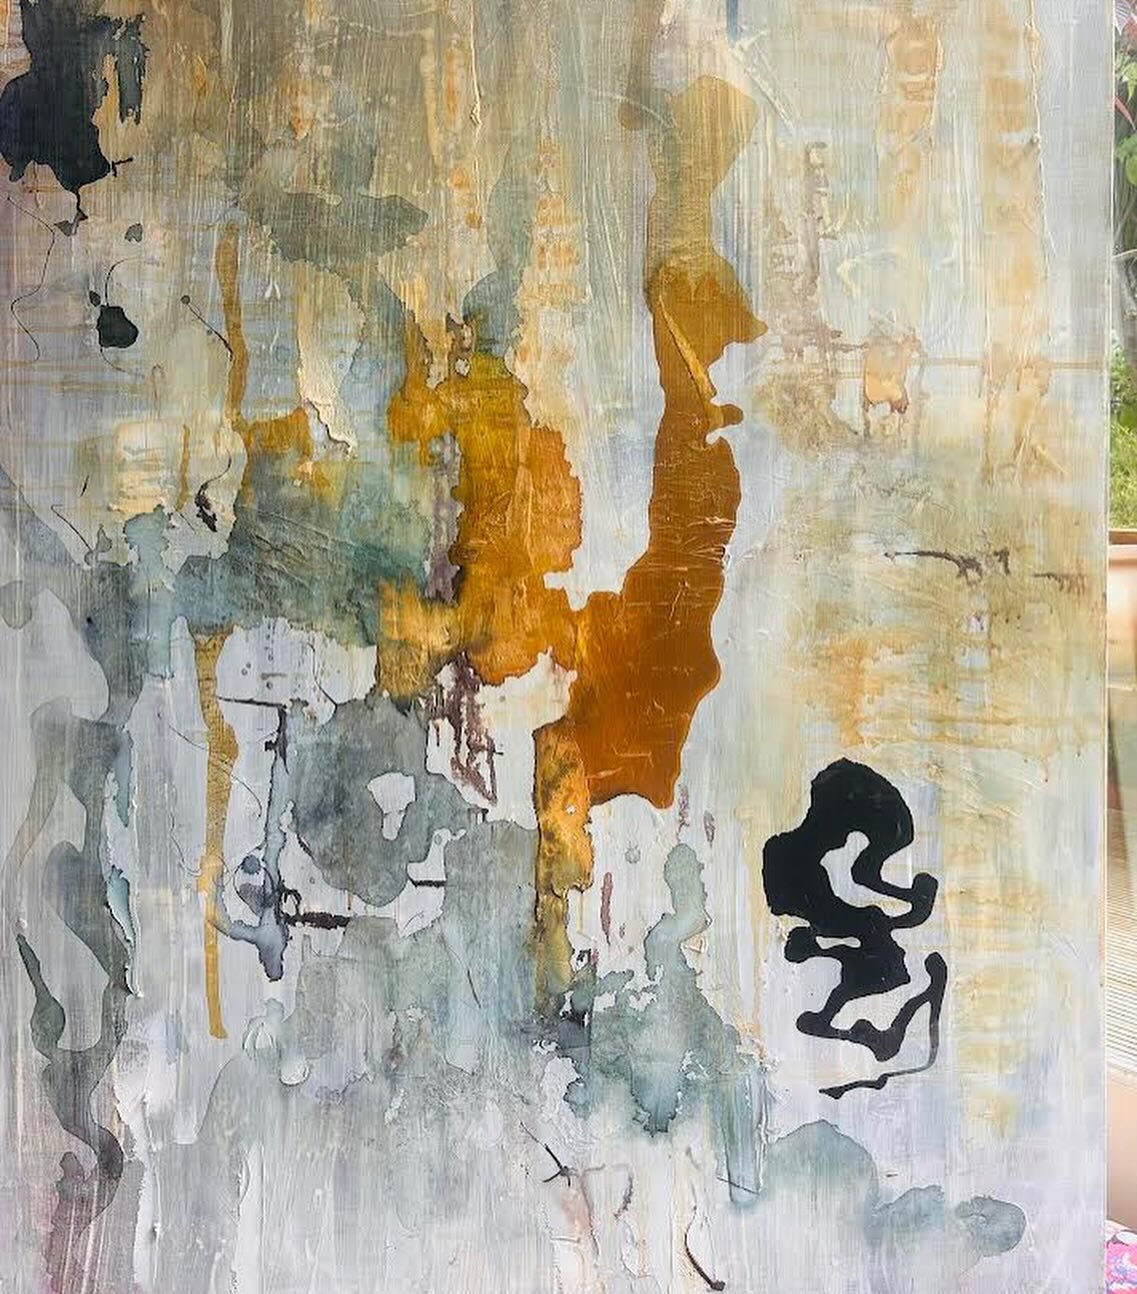 Aftermath, May 2024. A meditation on process in painting. Wonderful to see the latest iteration of this abstract piece by Julia Glyn Pickett and to follow her exploration of process. Here the current work is followed by its original starting point. J